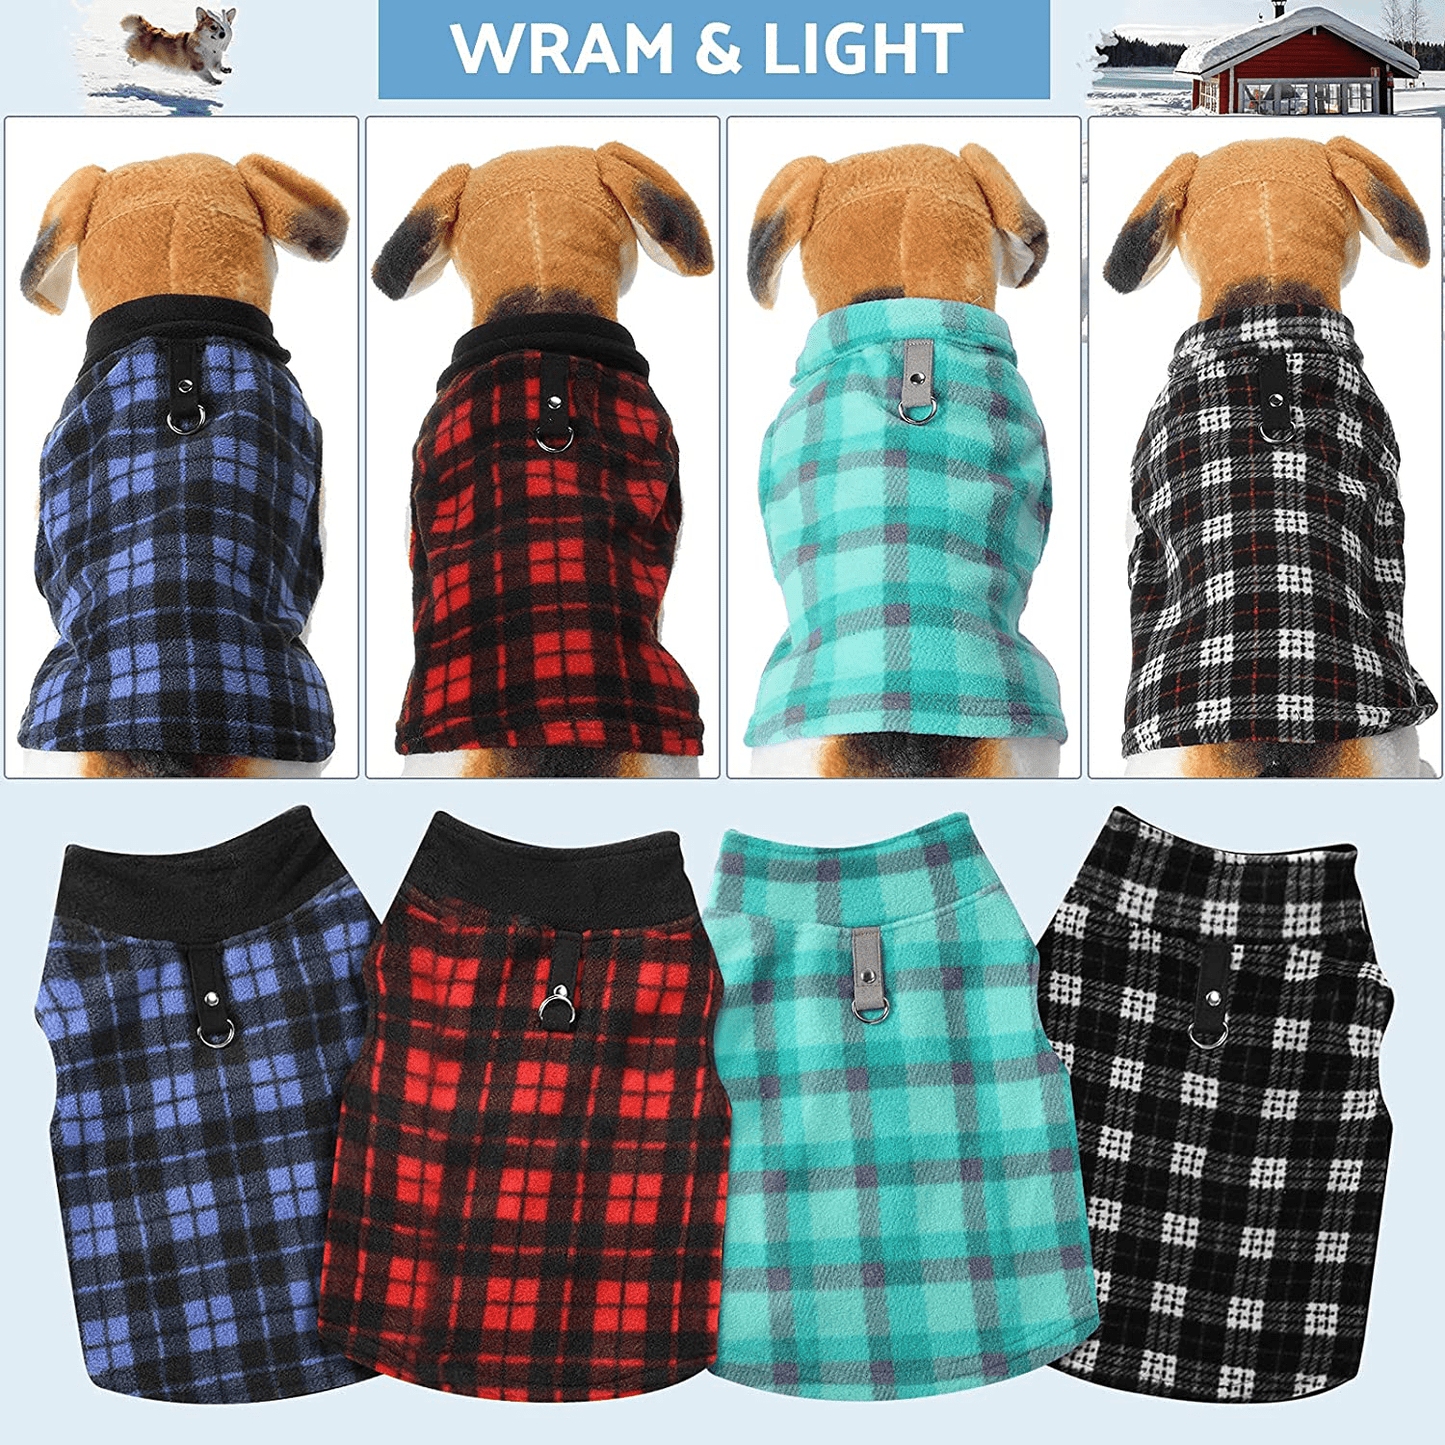 4 Pieces Fabric Dog Sweater with Leash Ring Winter Fleece Vest Dog Pullover Jacket Warm Pet Dog Clothes for Puppy Small Dogs Cat Chihuahua Boy